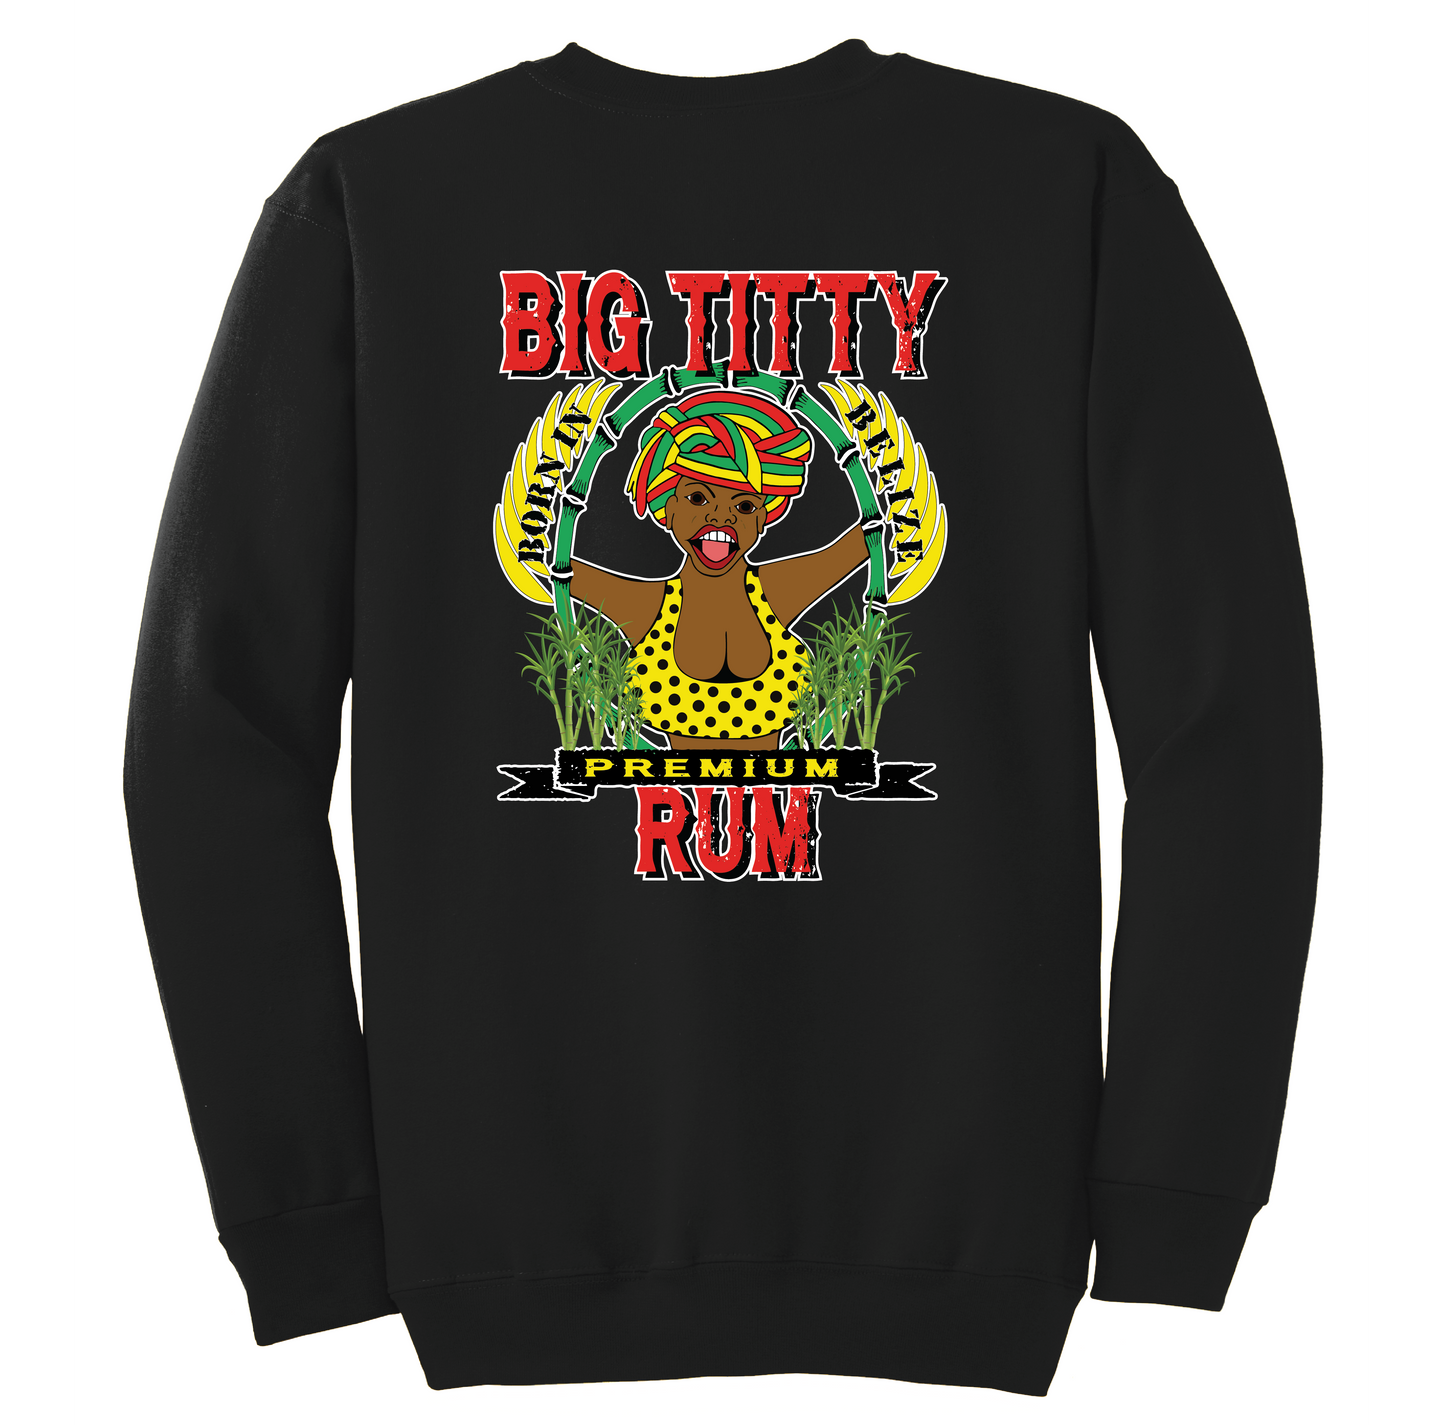 Big Titty Rum Crewneck - Logo on front with blank back